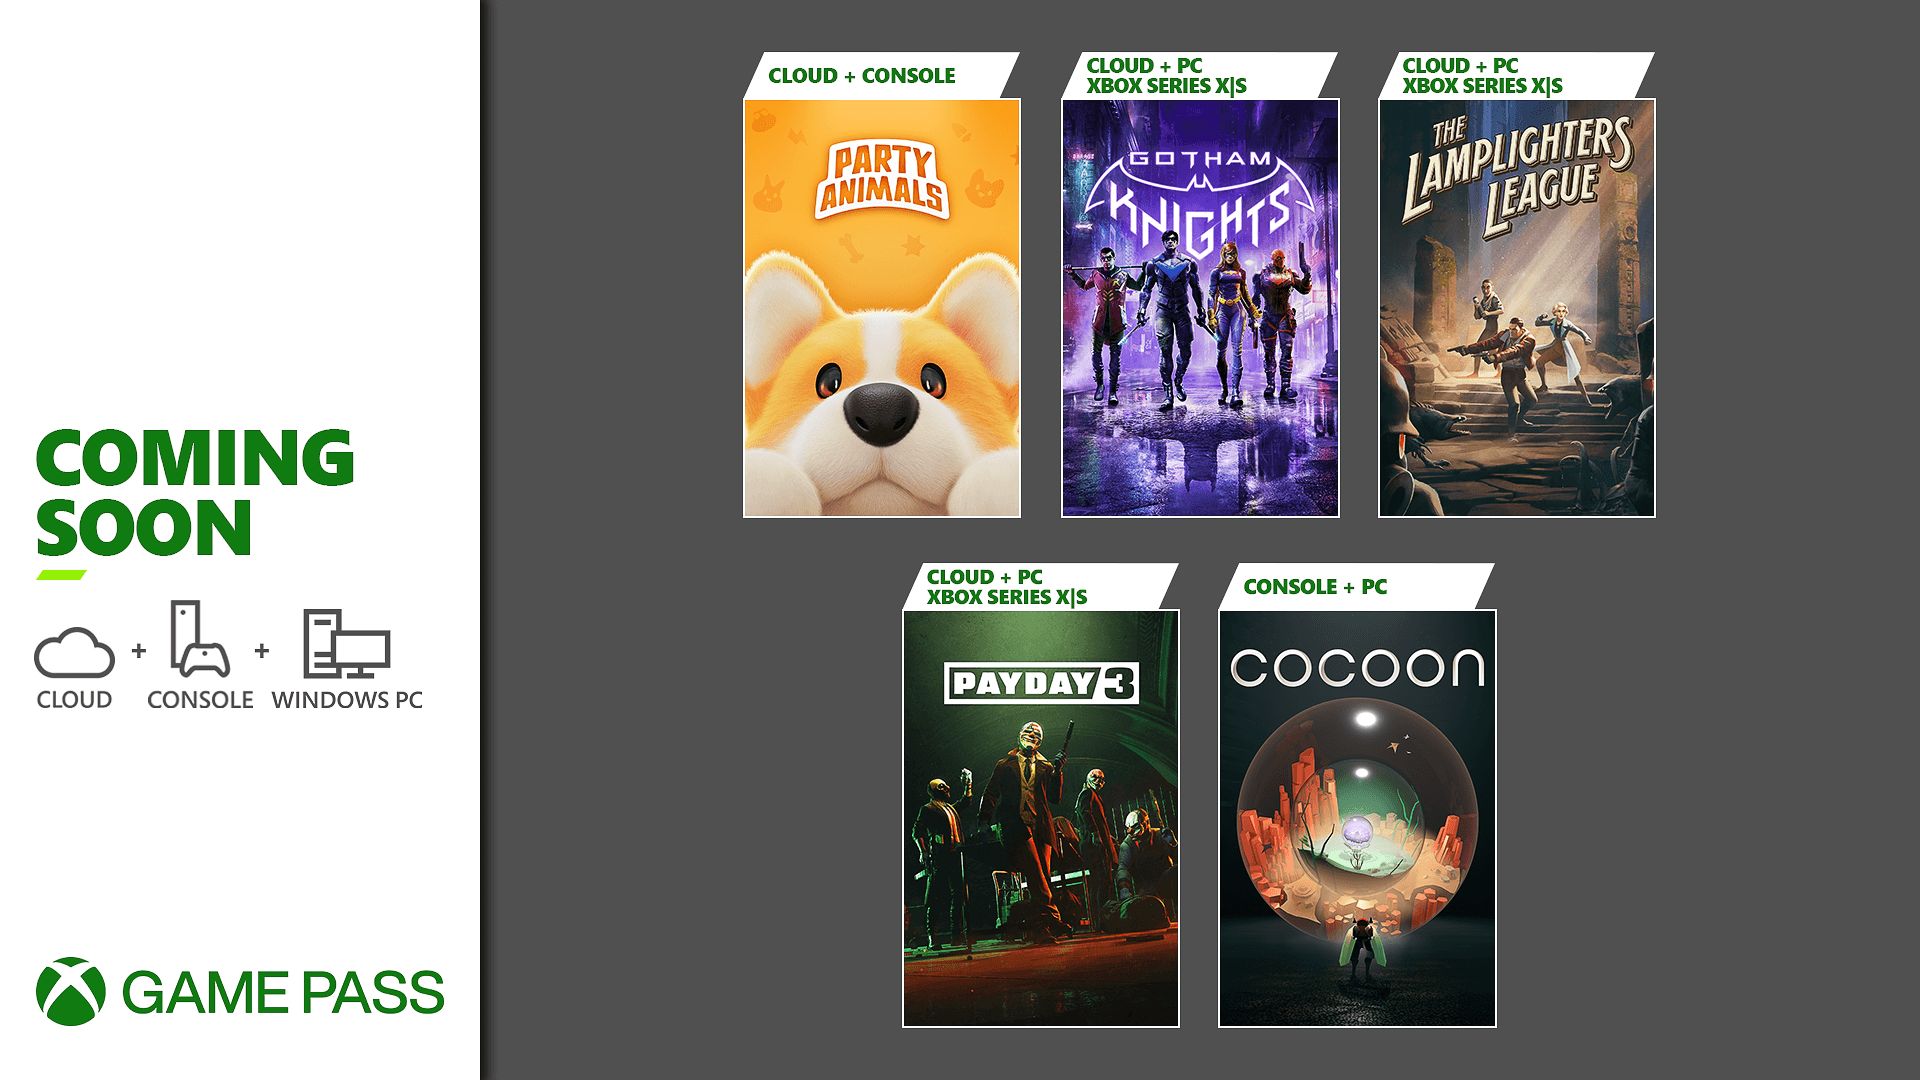 Day One Releases of the Month for Xbox Game Pass Reach Four Titles This Time